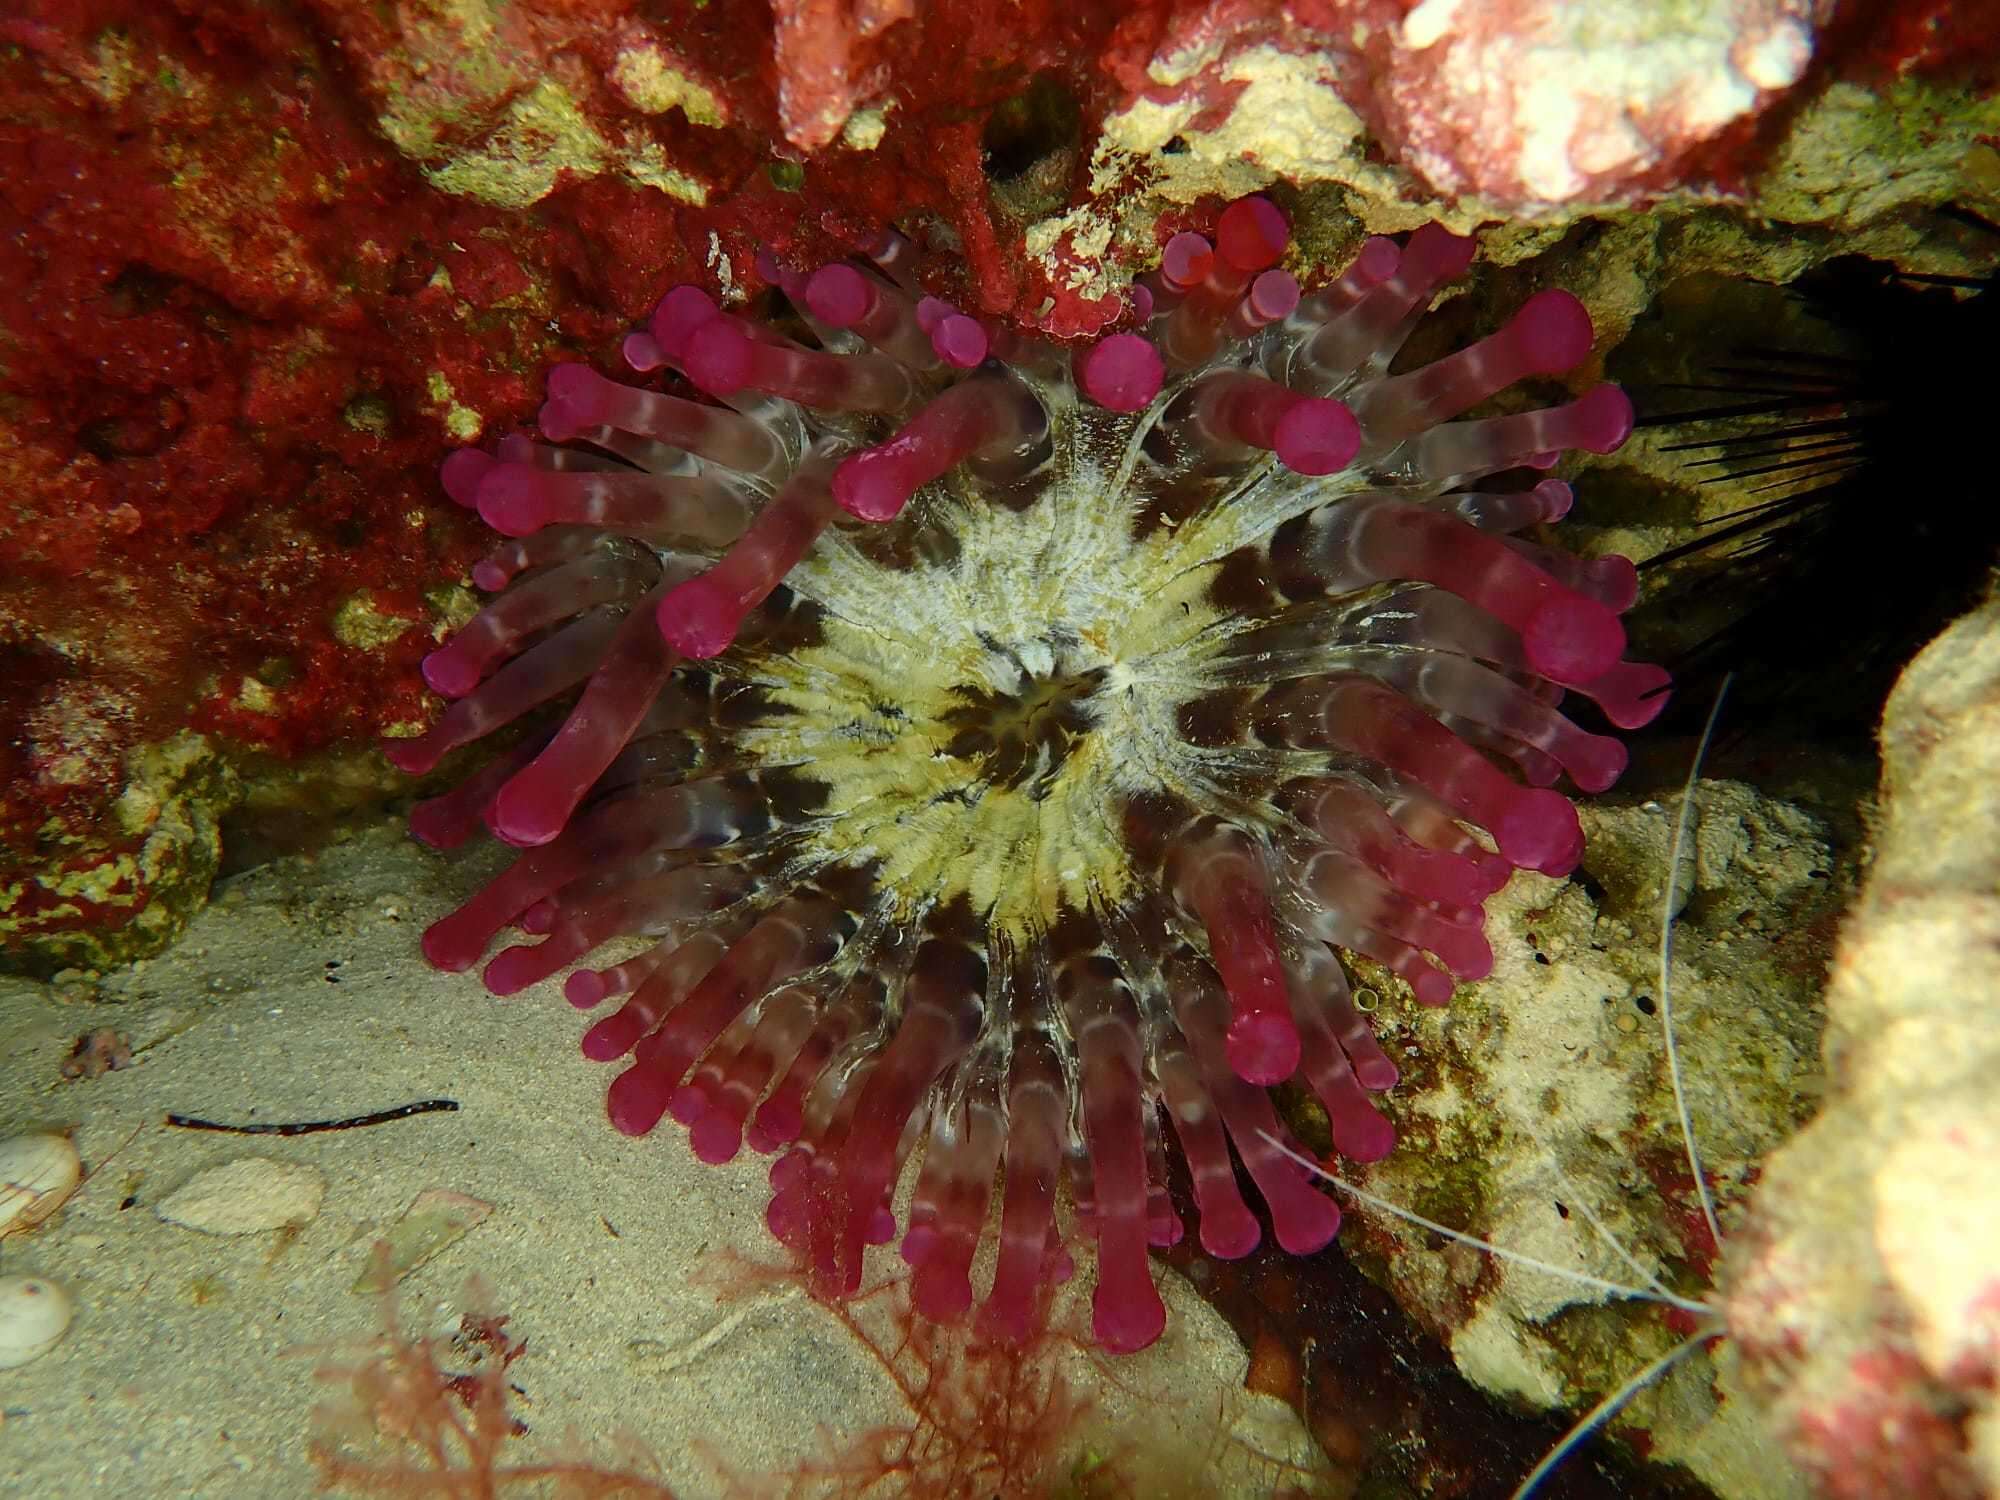 Image of blunt-tentacled anemone